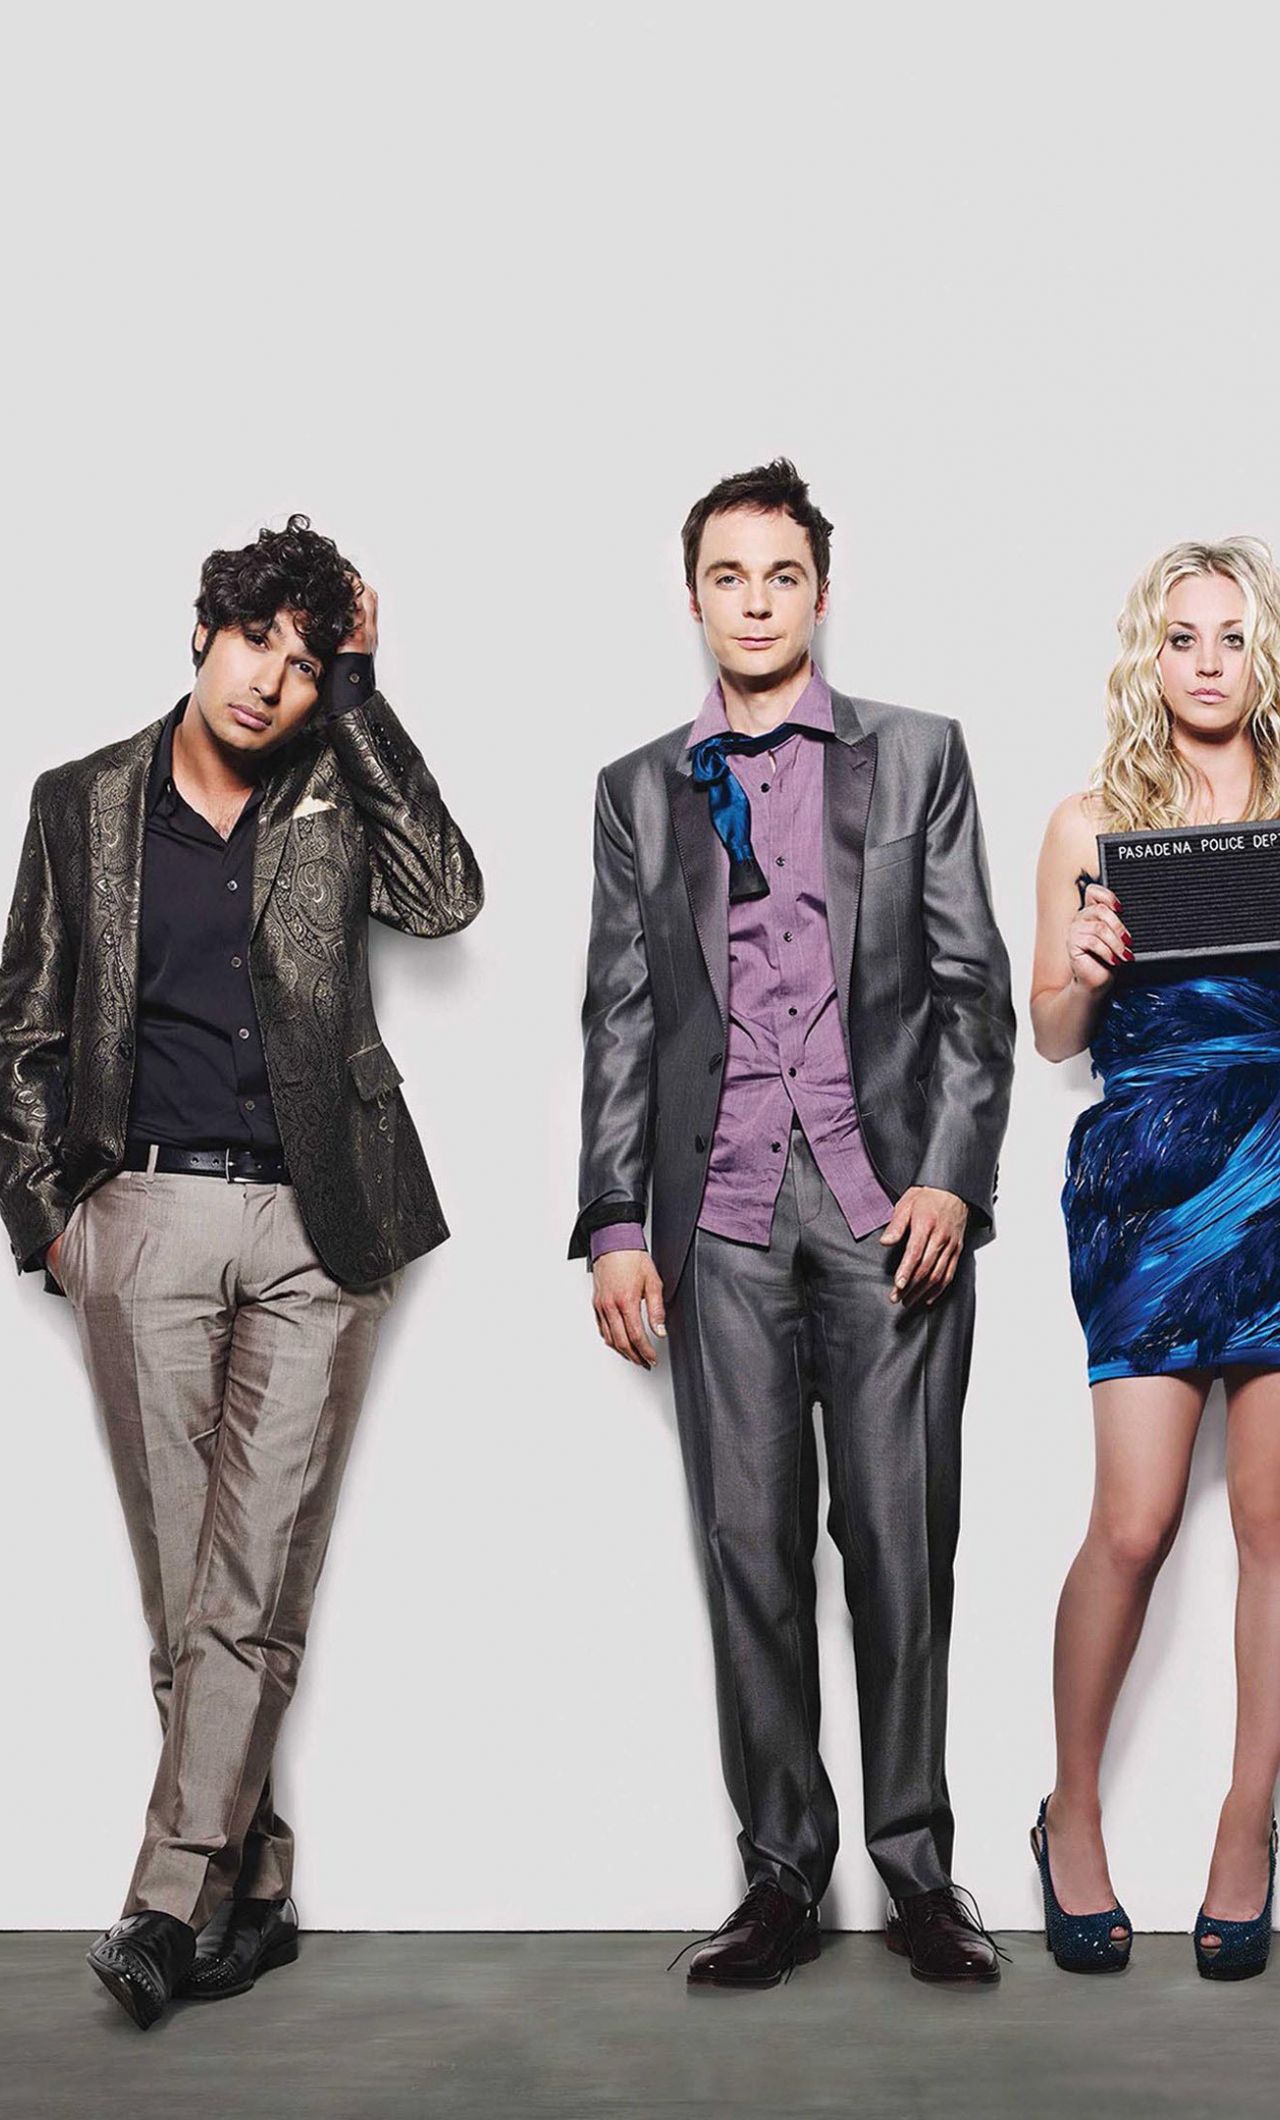 Download 1280x2120 wallpaper the big bang theory, tv show, cast, iphone 6 plus, 1280x2120 HD image, background, 8517